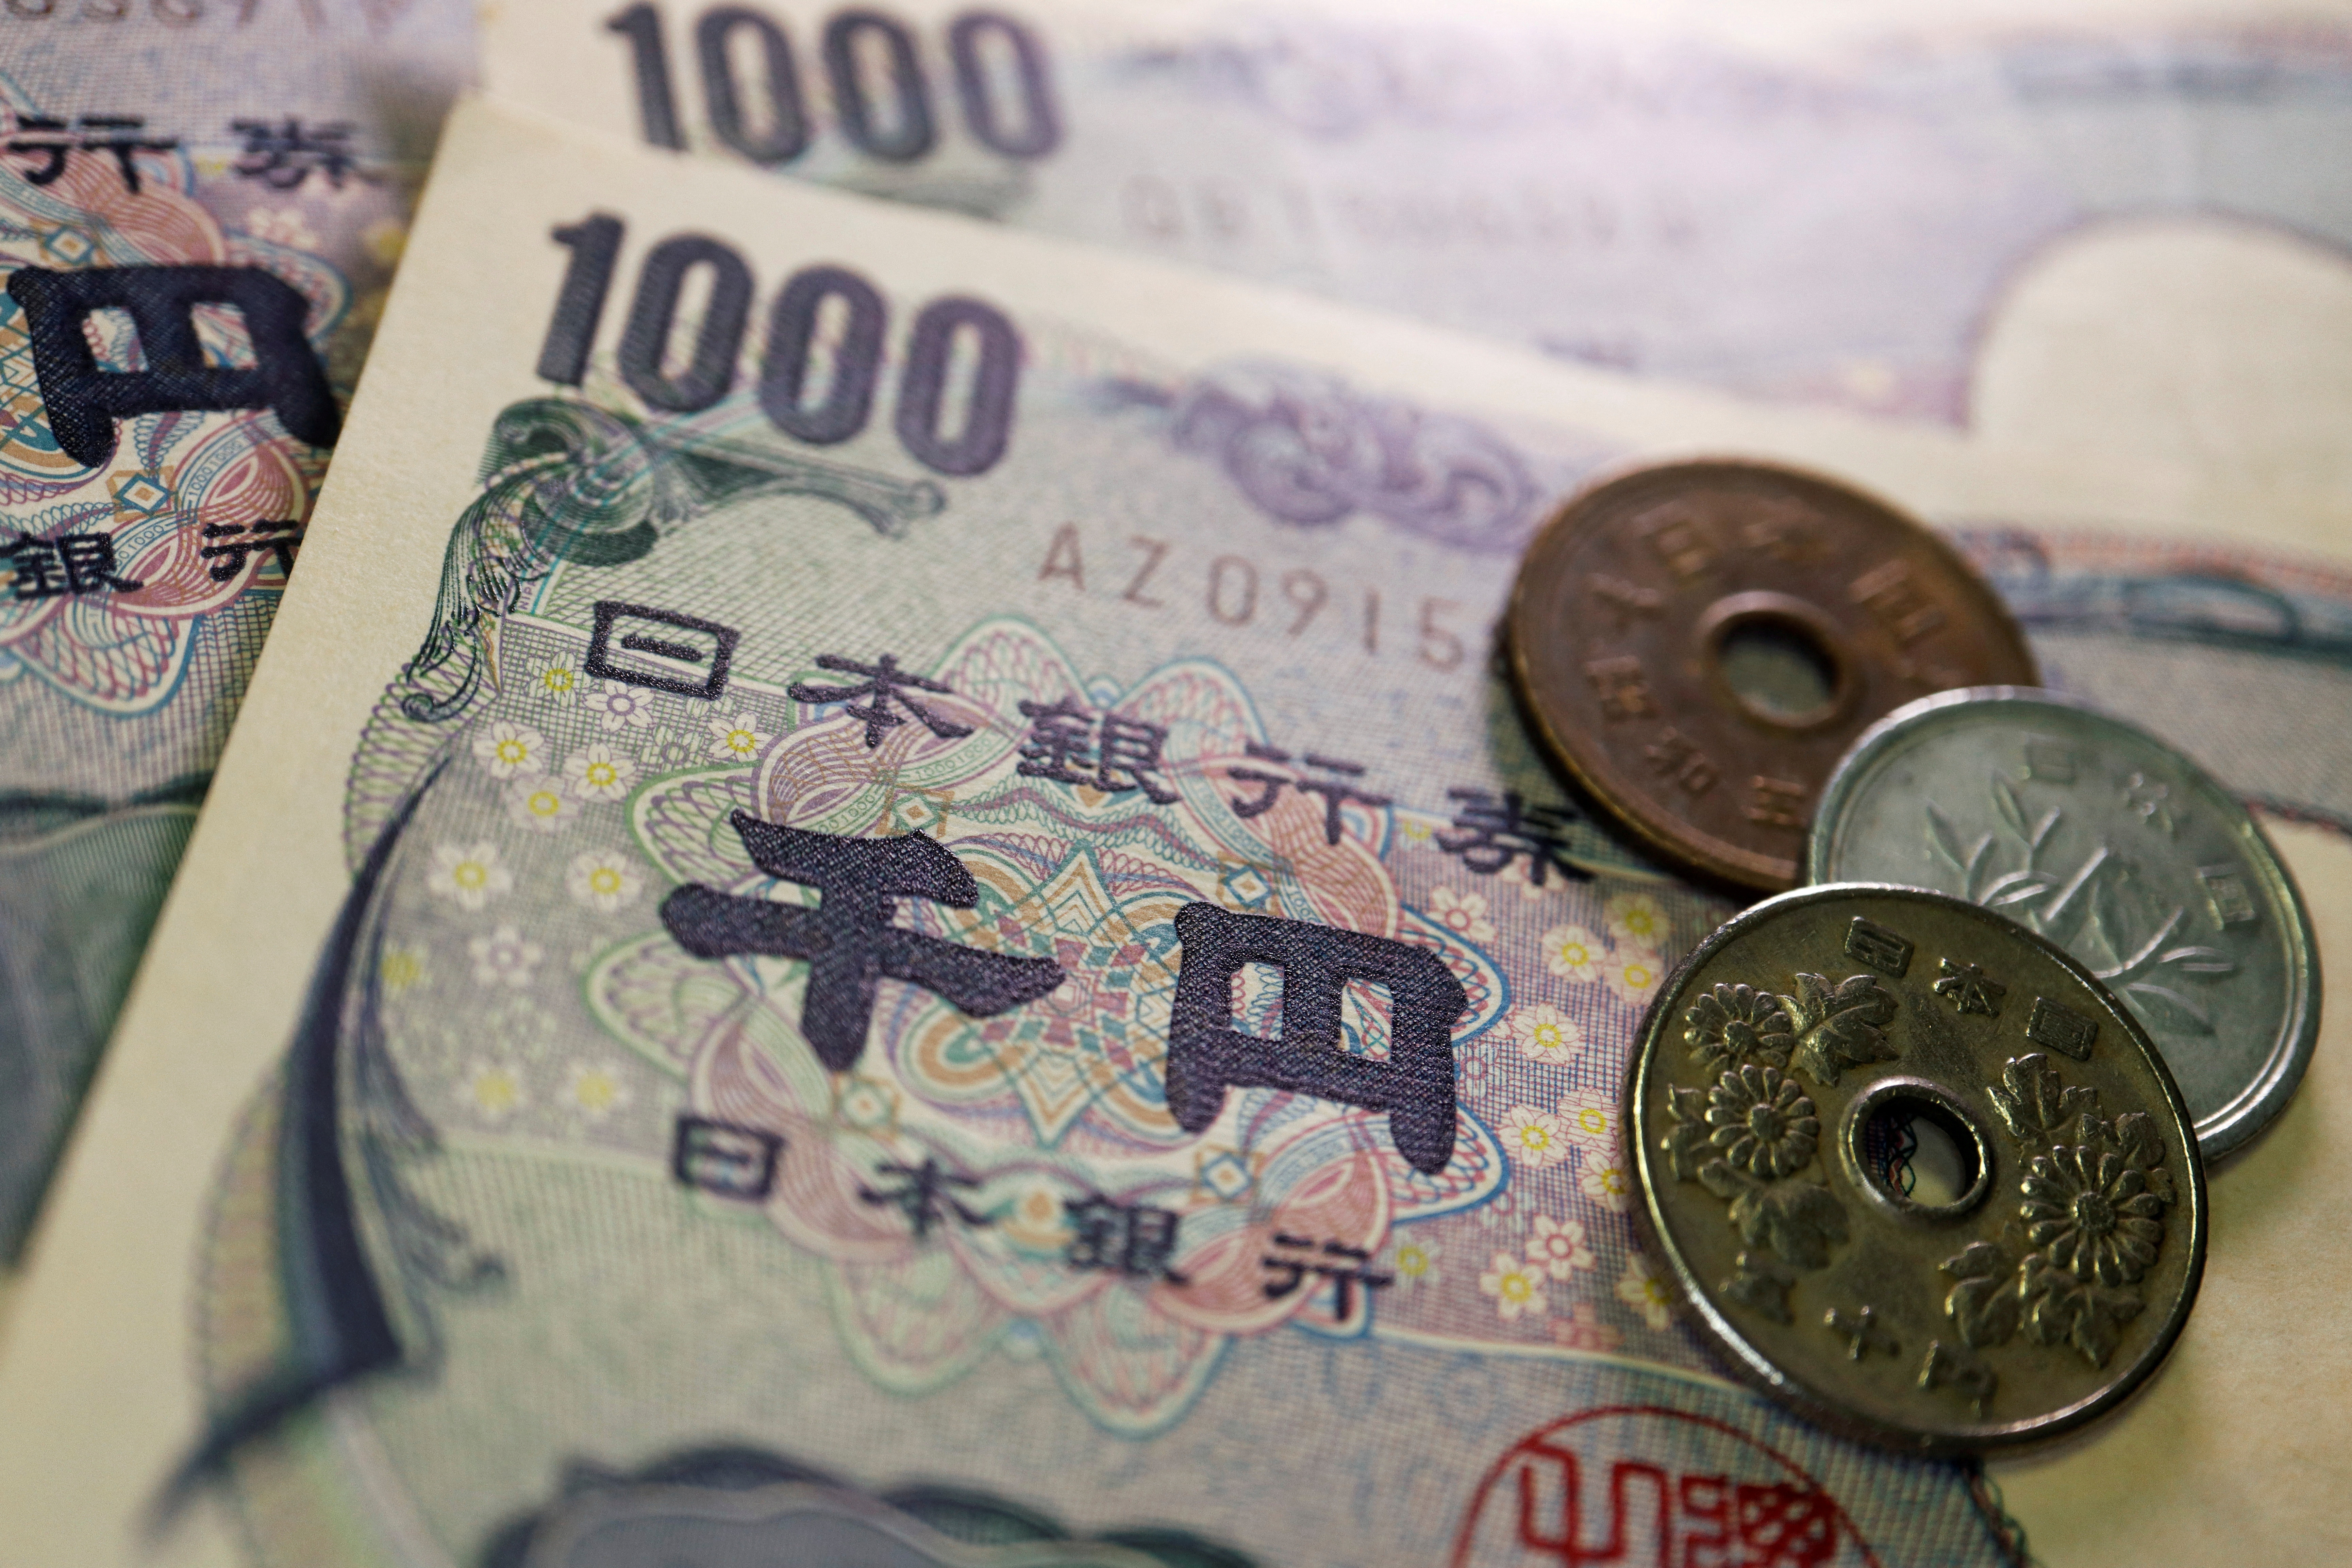 Japanese yen coins and banknotes